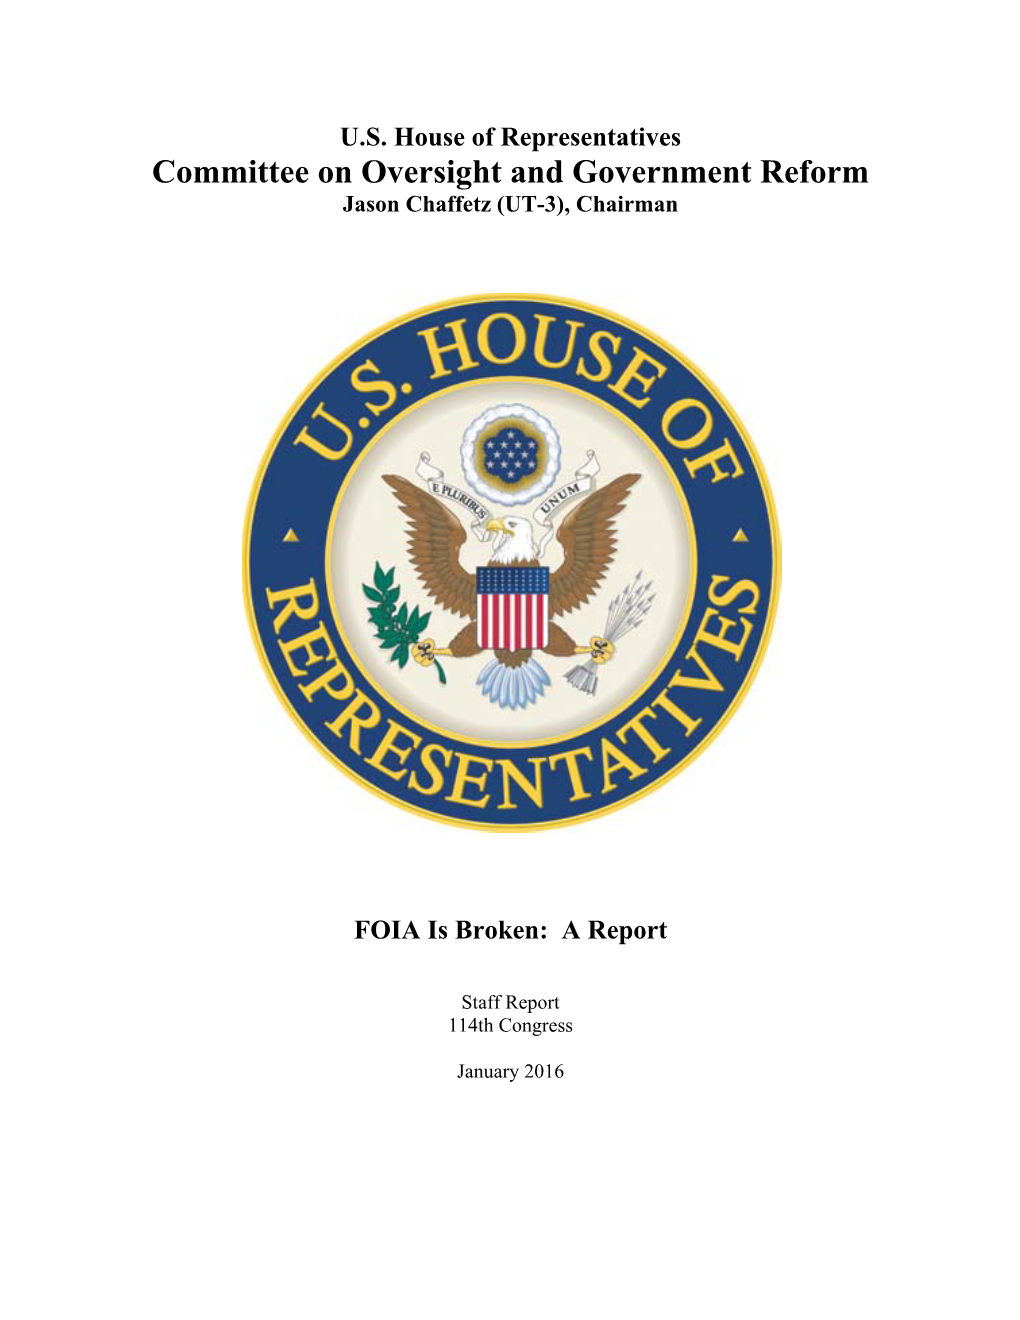 Committee on Oversight and Government Reform Jason Chaffetz (UT-3), Chairman